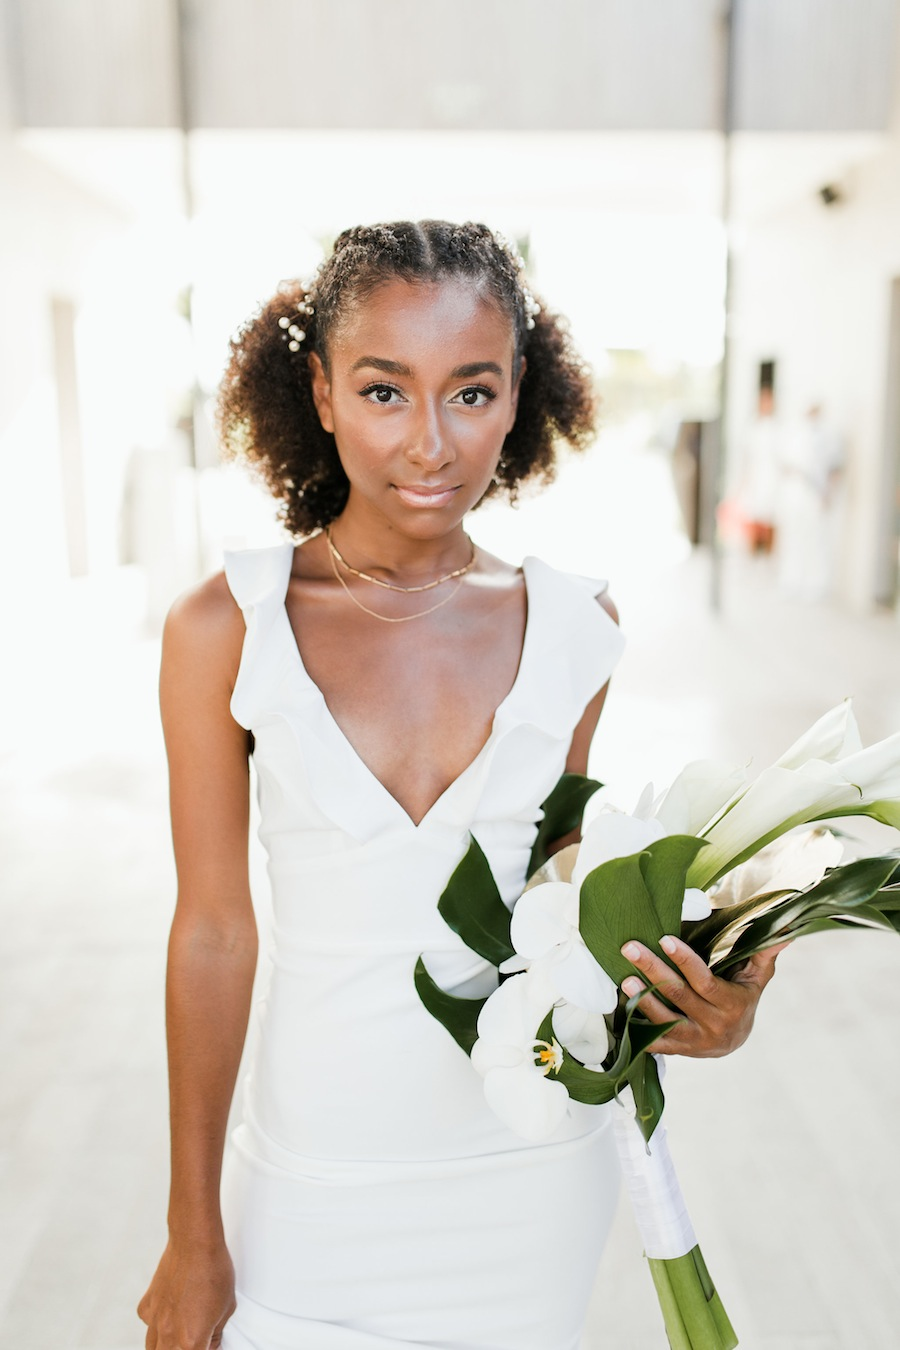 Bright and Beautiful Tropical Styled Shoot in Punta Cana |Munaluchi Bride - Bright and Beautiful Tropical Styled Shoot in Punta Cana |Munaluchi Bride -   12 beauty Shoot bride ideas